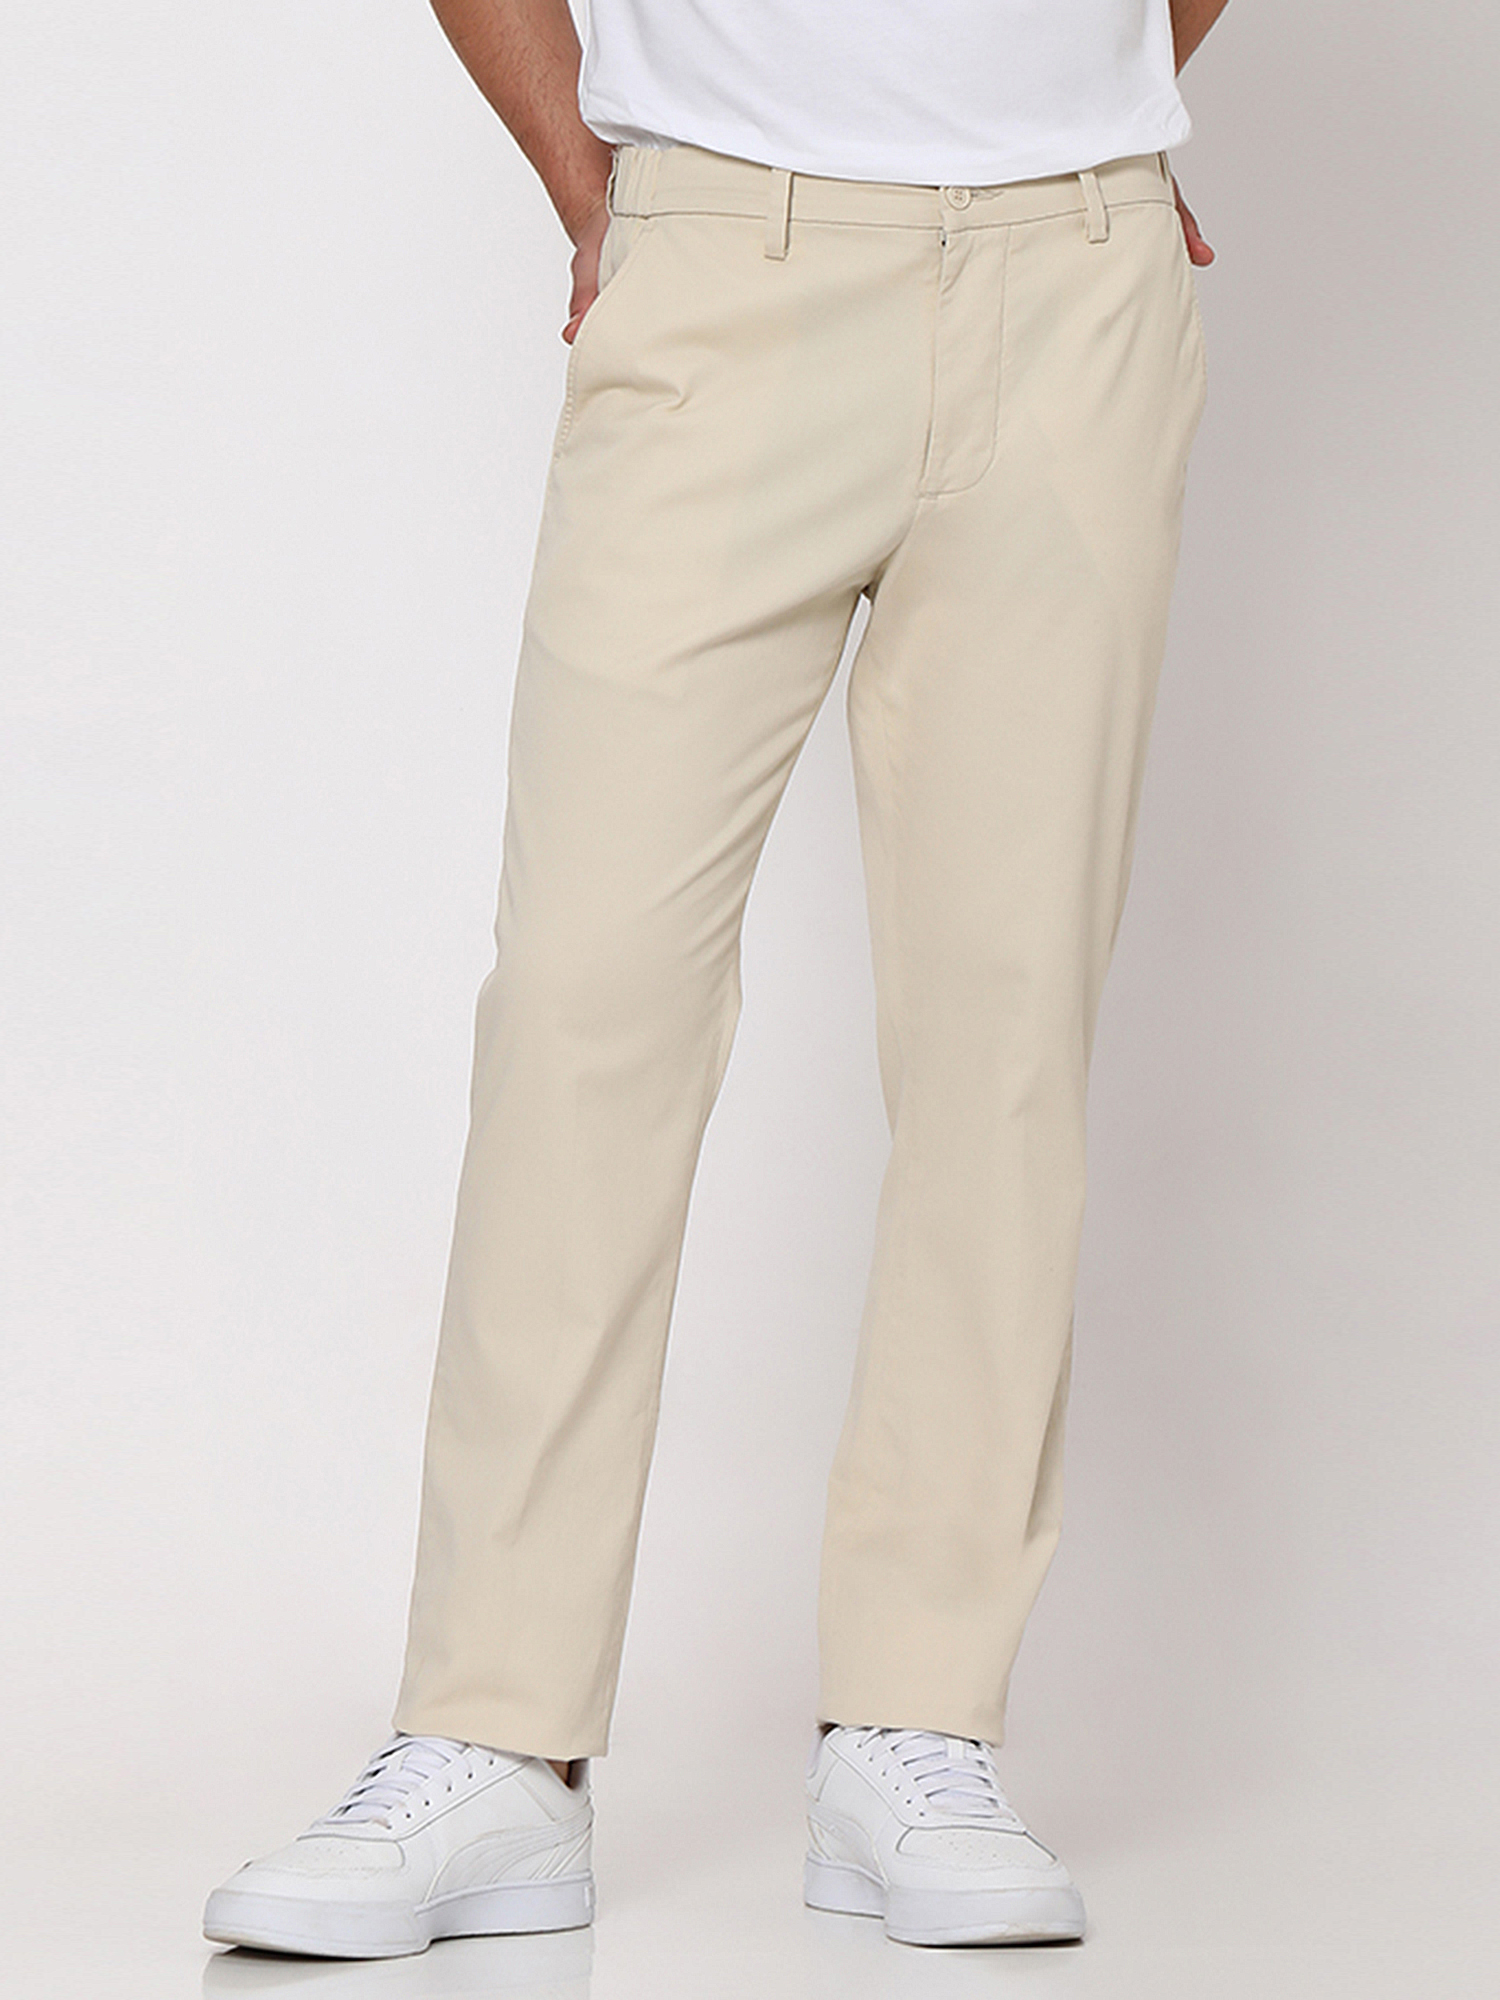 Buy Off White Super Slim Fit Stretch Chinos Online at Muftijeans